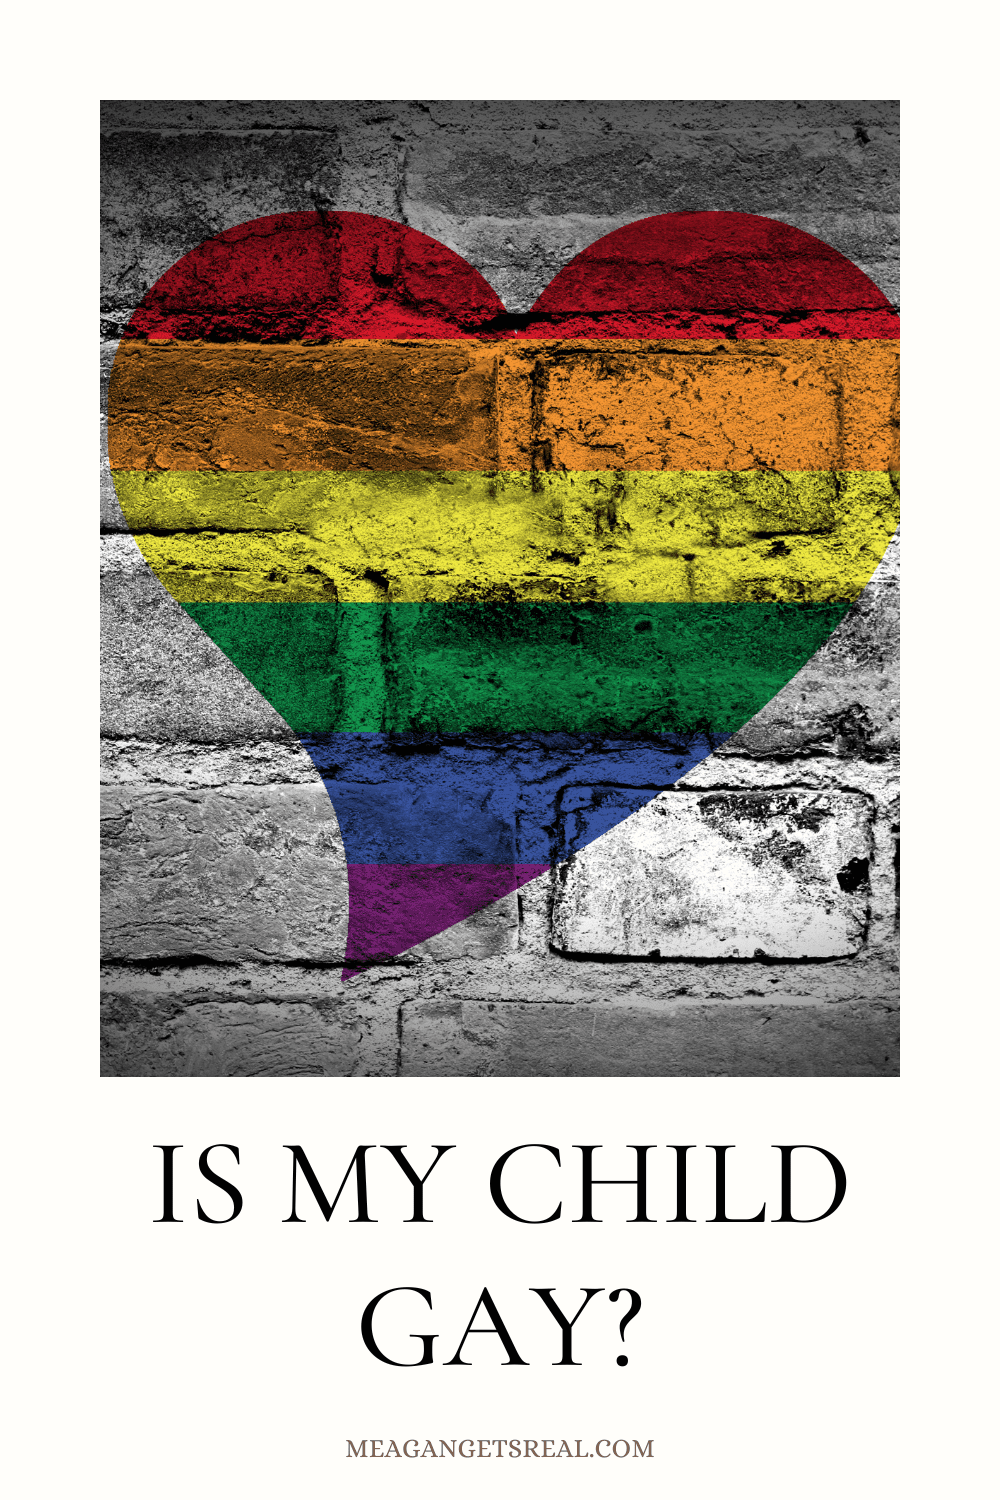 Is my child gay? - Tips for preparing for your child to come out